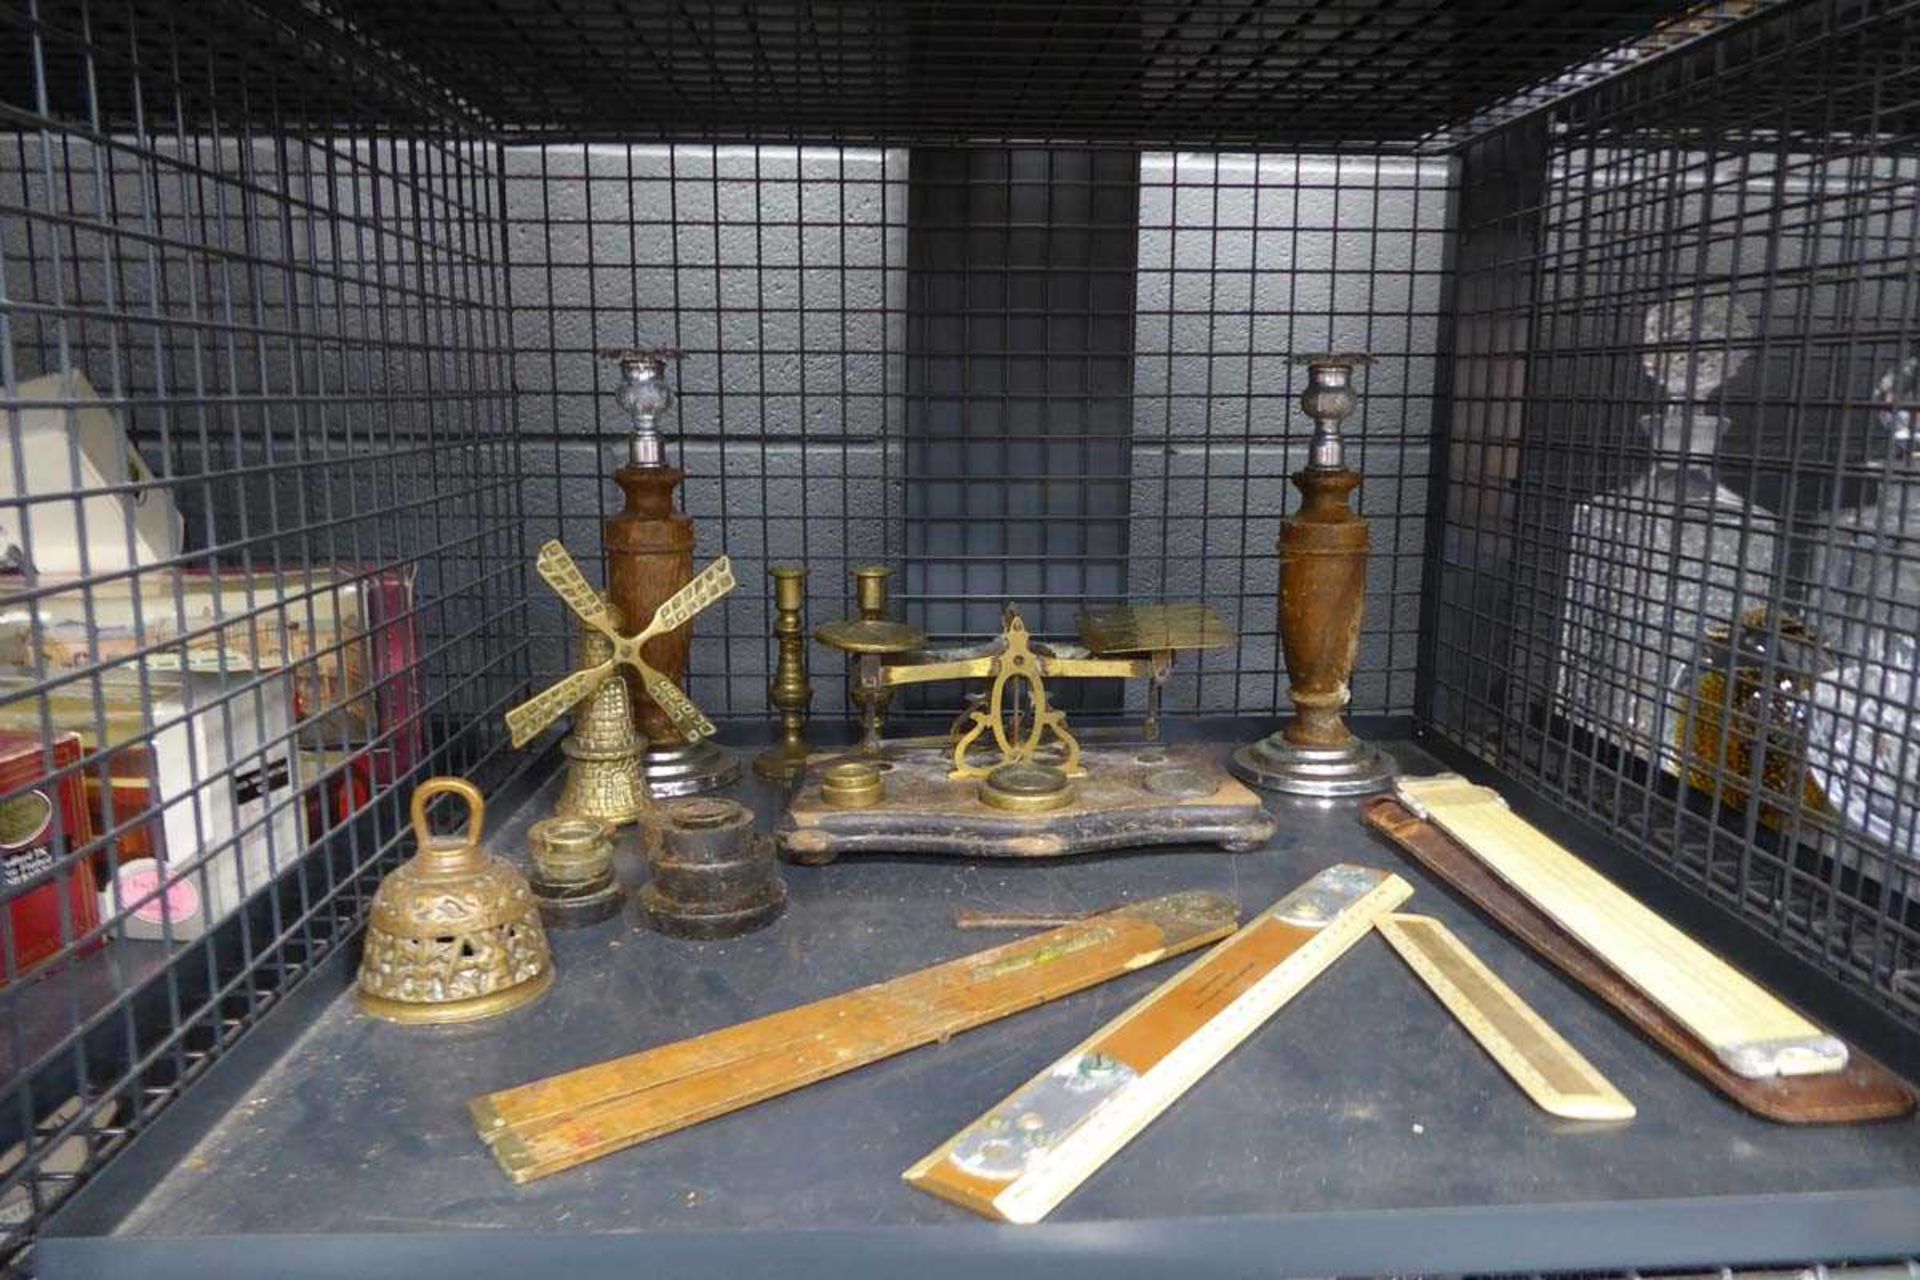 Cage containing postal scales, rulers, weights and candlesticks